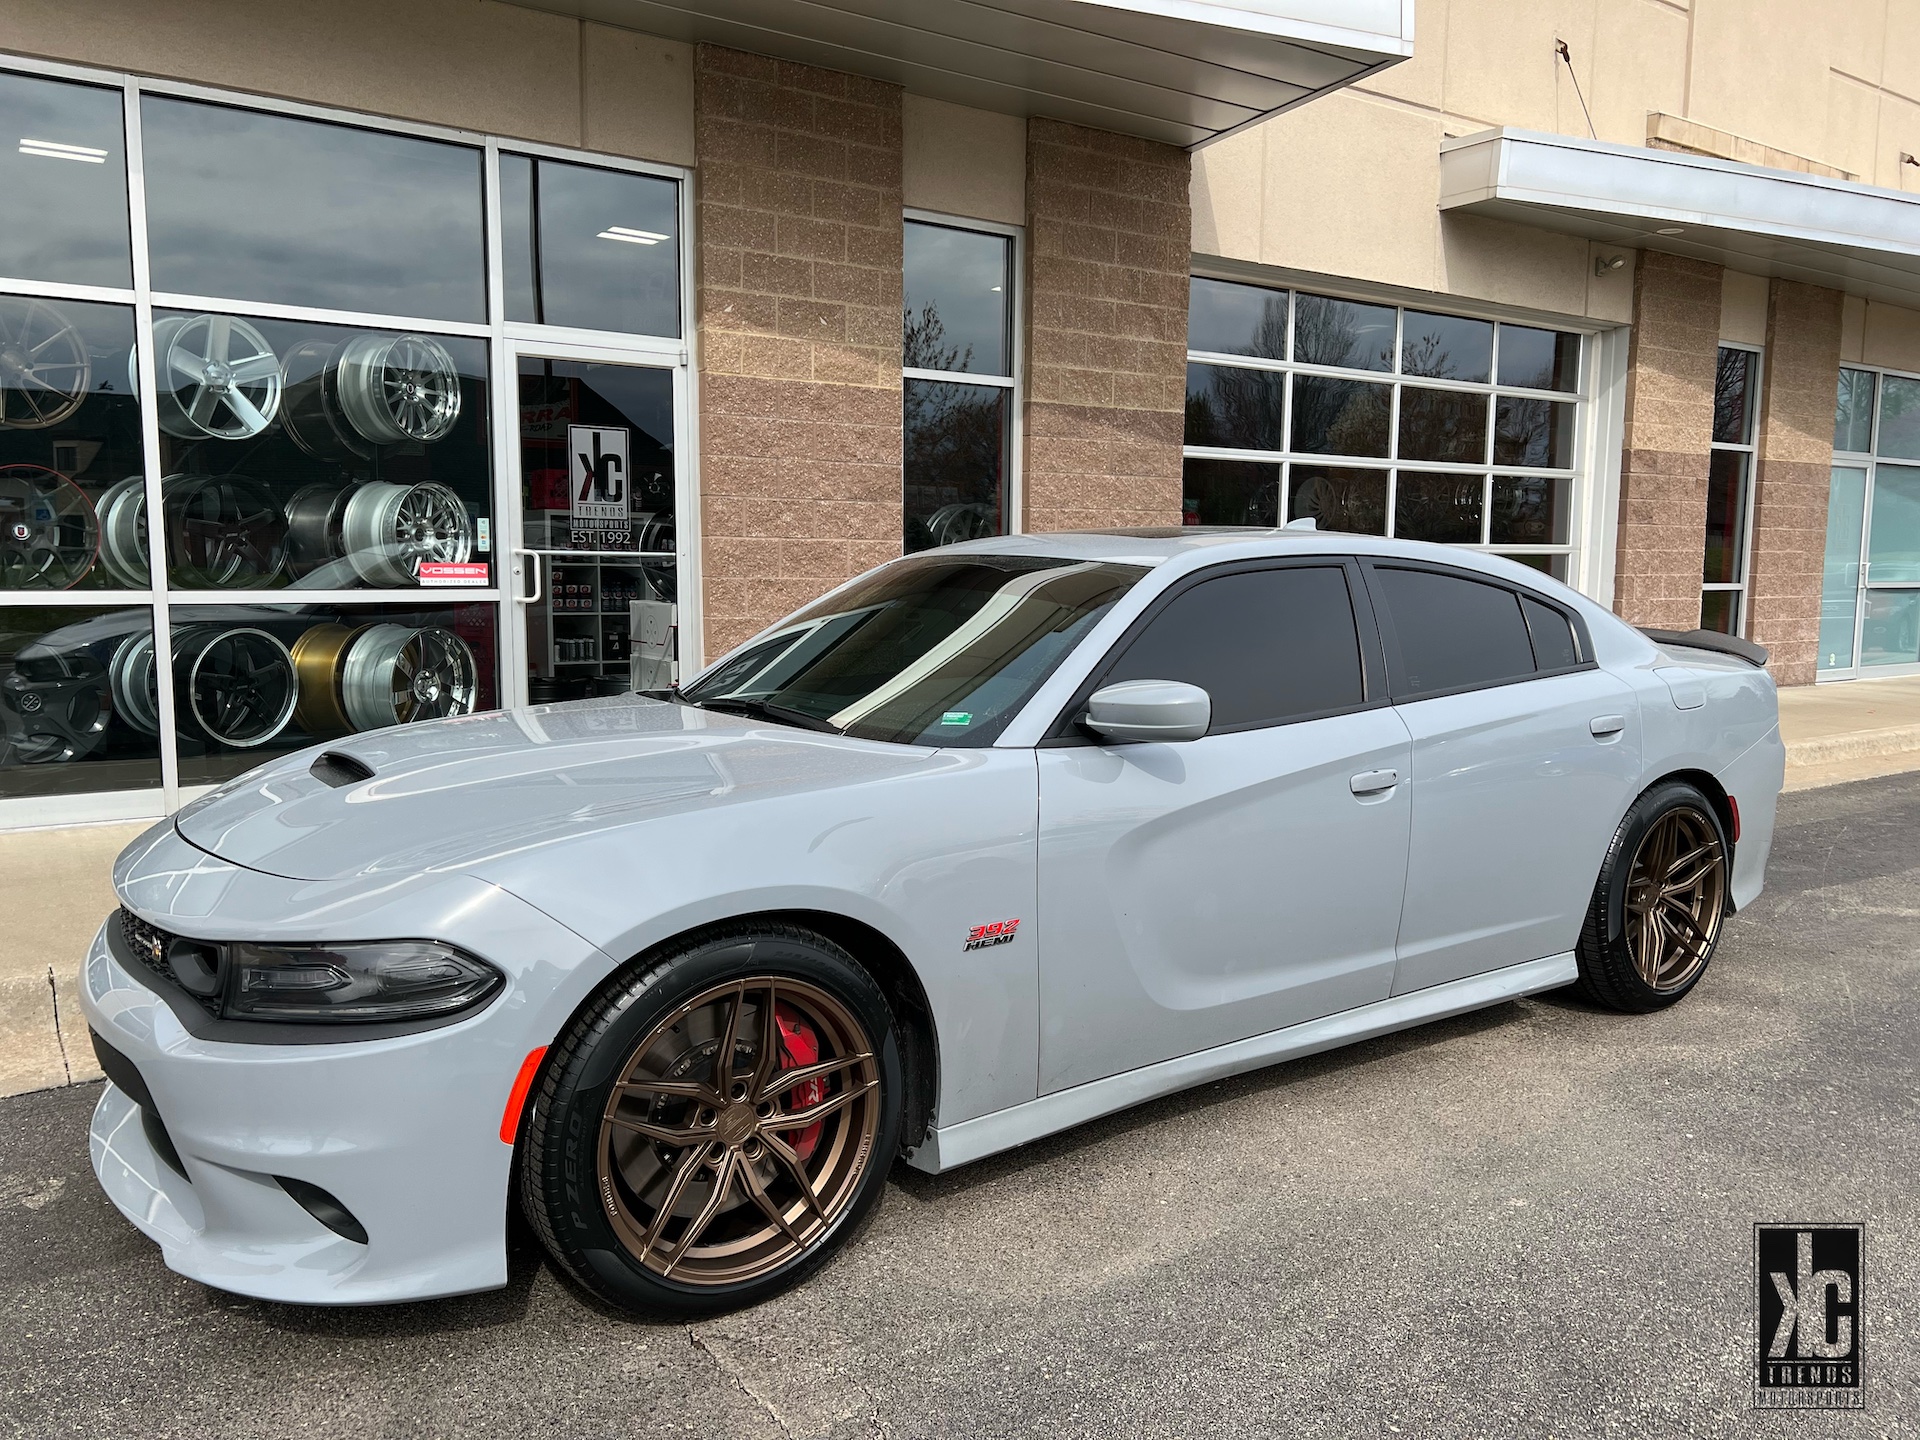  Dodge Charger with 